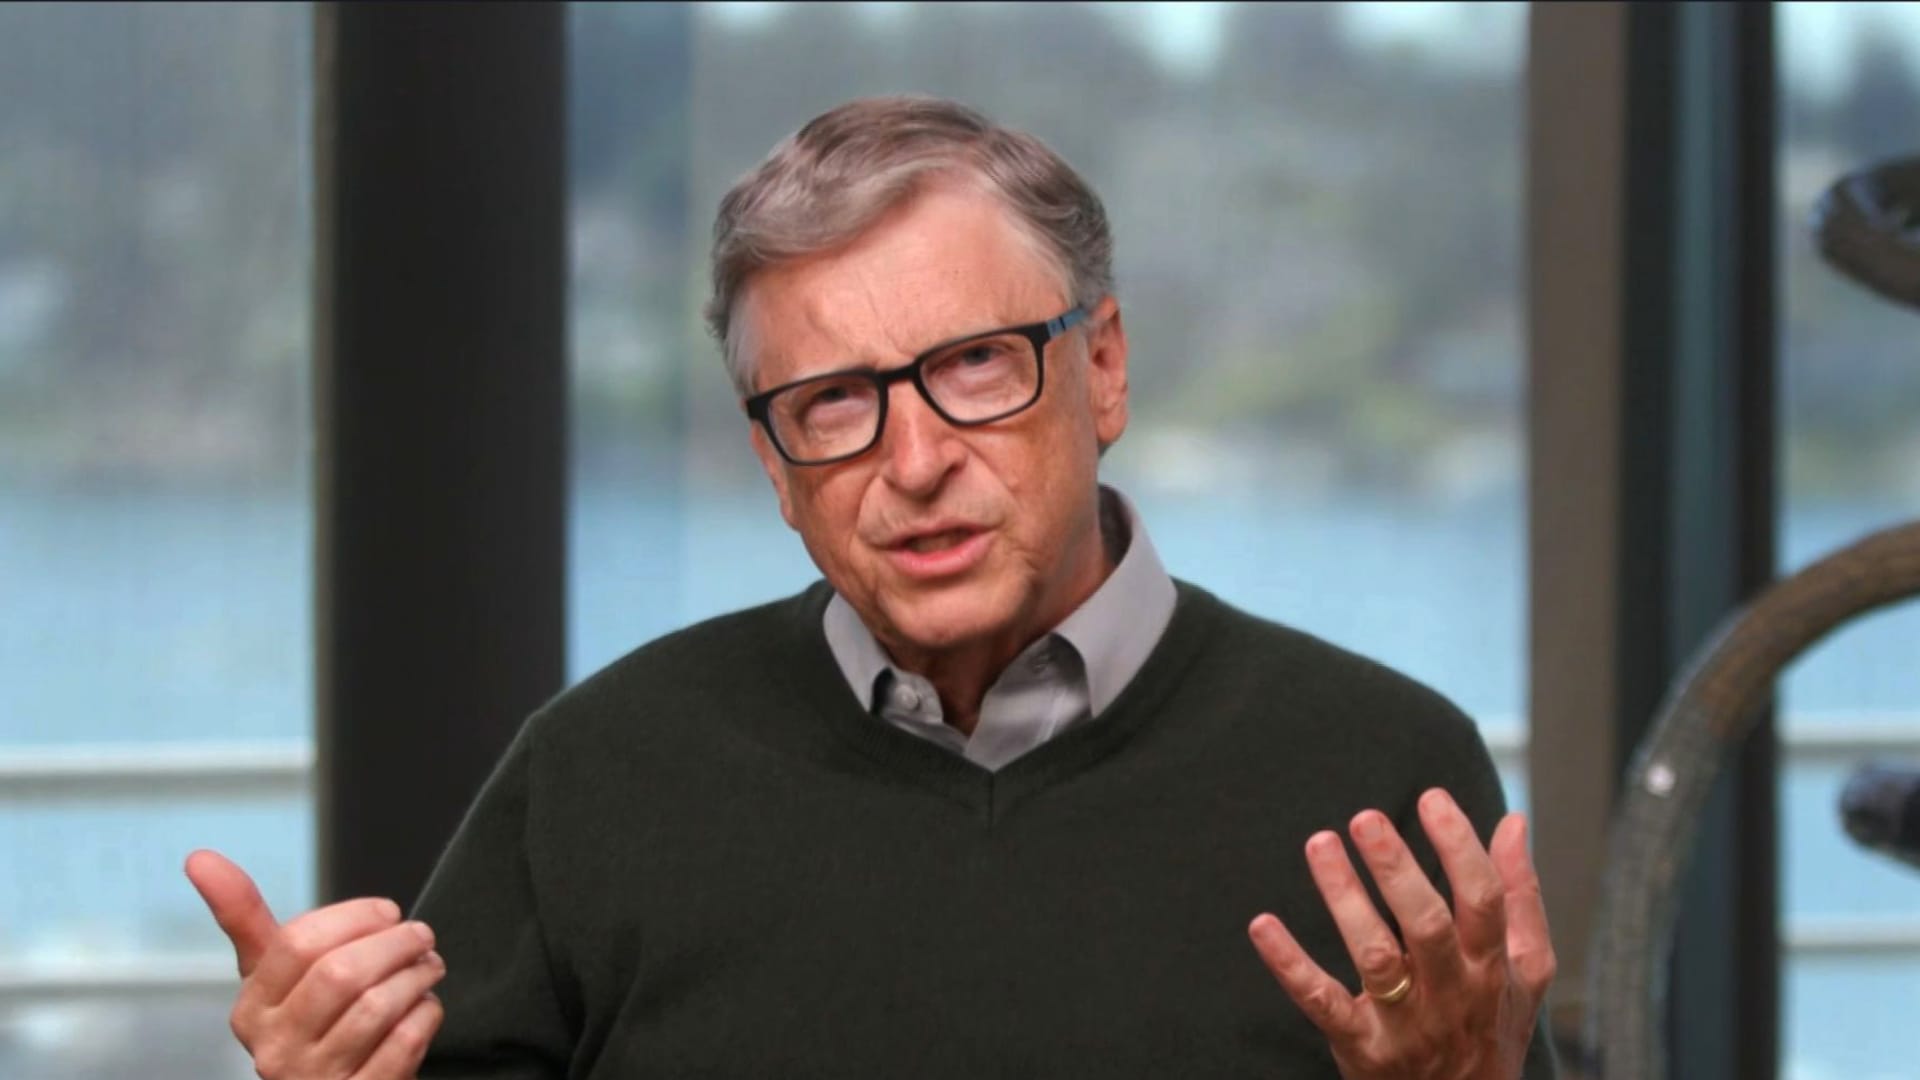 Bill Gates: 'The next big question' is how to distribute coronavirus vaccines to people in need